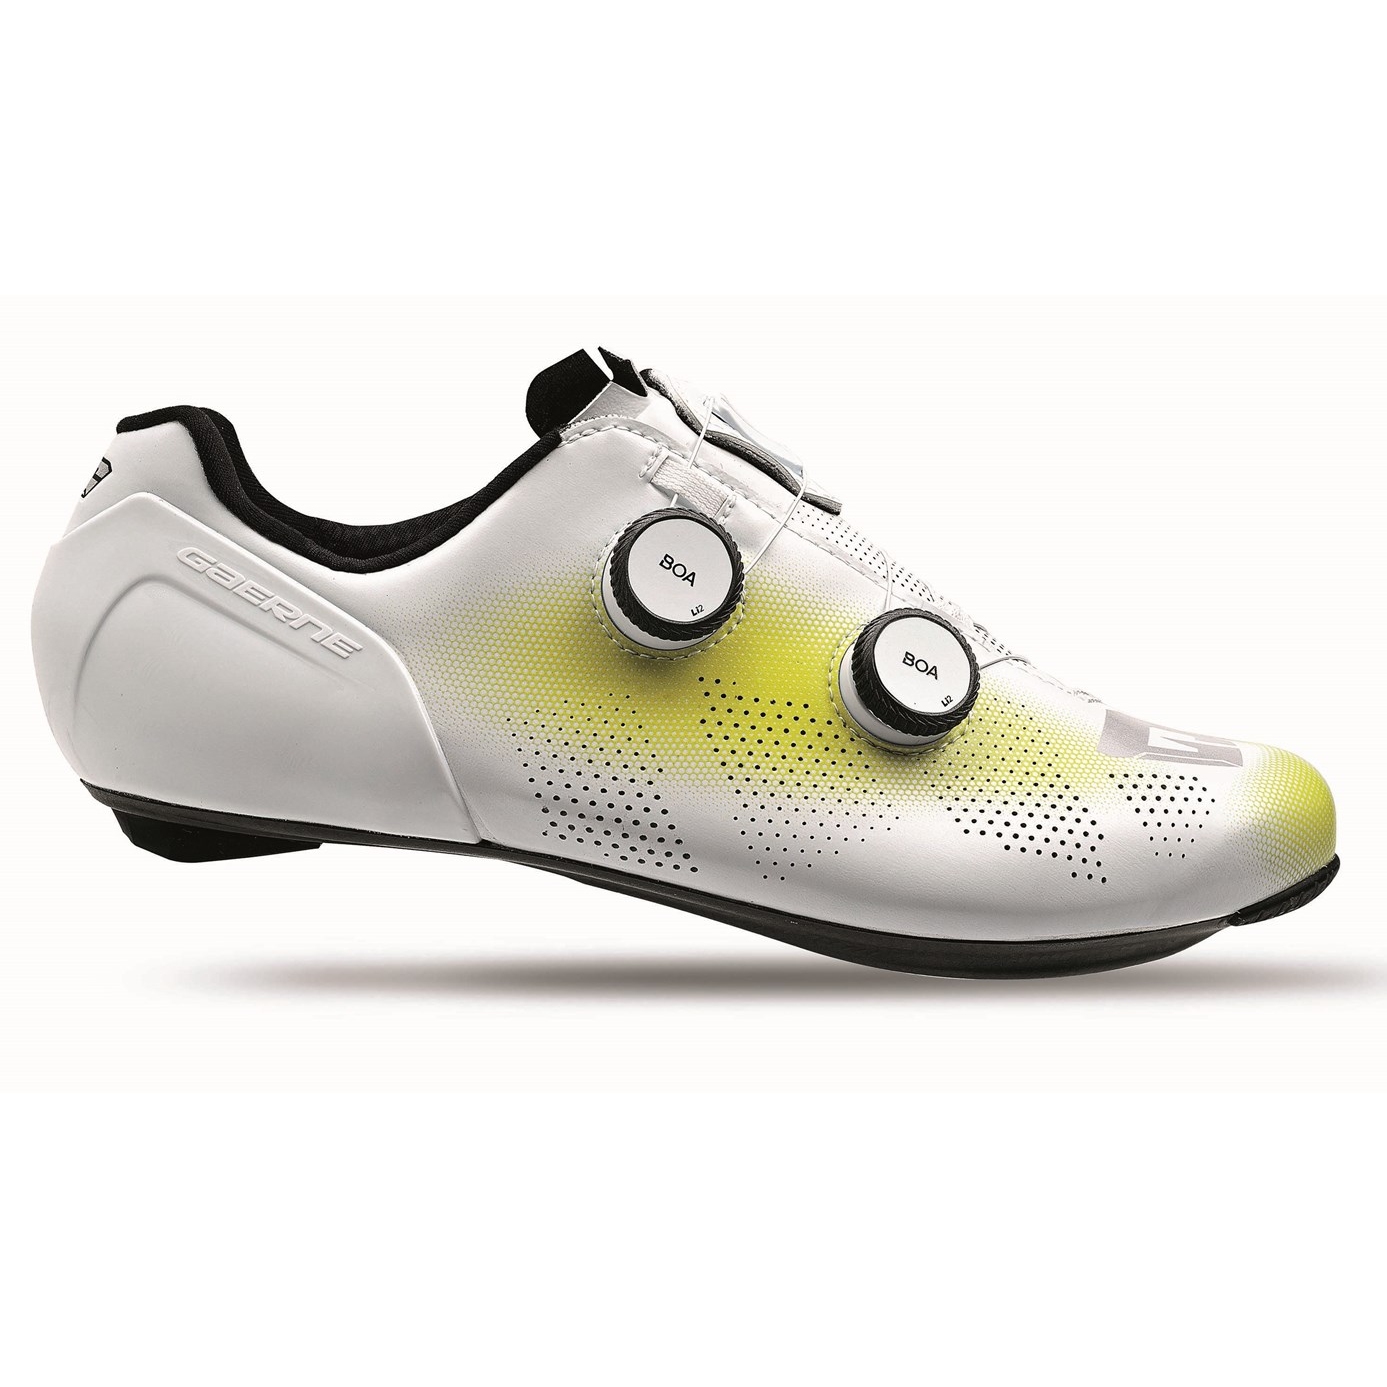 Picture of Gaerne Carbon G.STL Road Shoes - Light Flo Yellow White